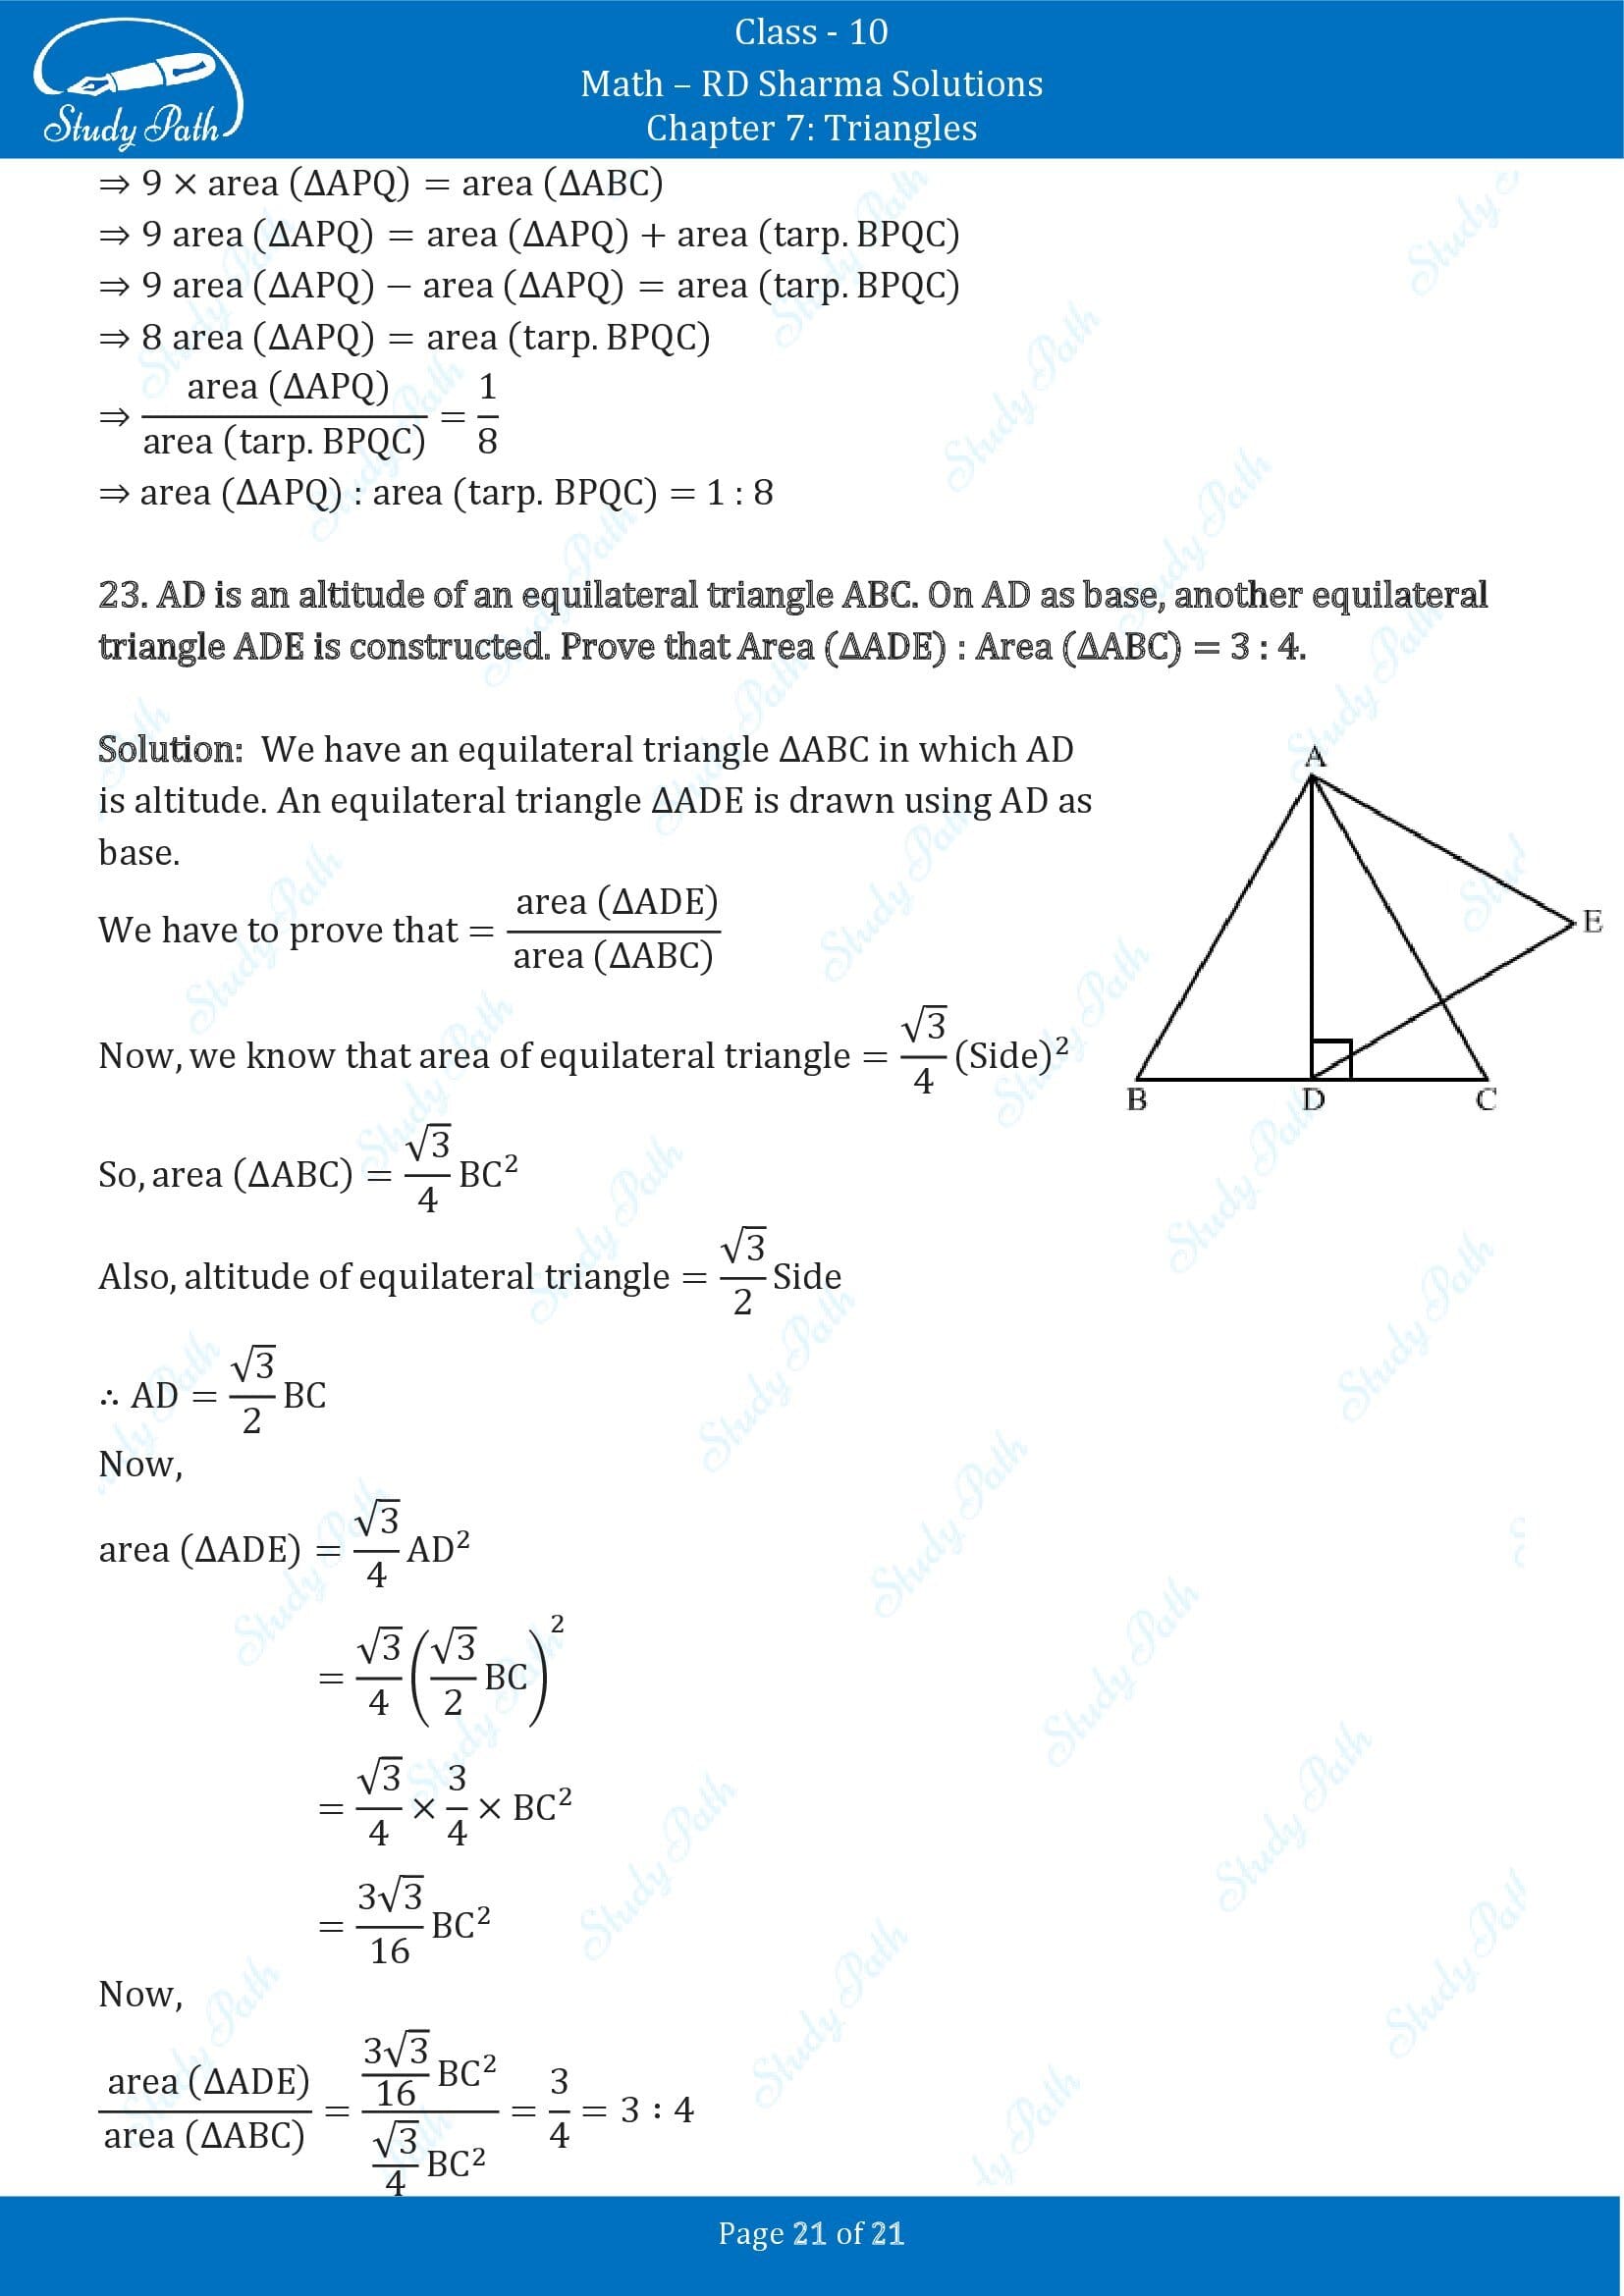 RD Sharma Solutions Class 10 Chapter 7 Triangles Exercise 7.6 00021